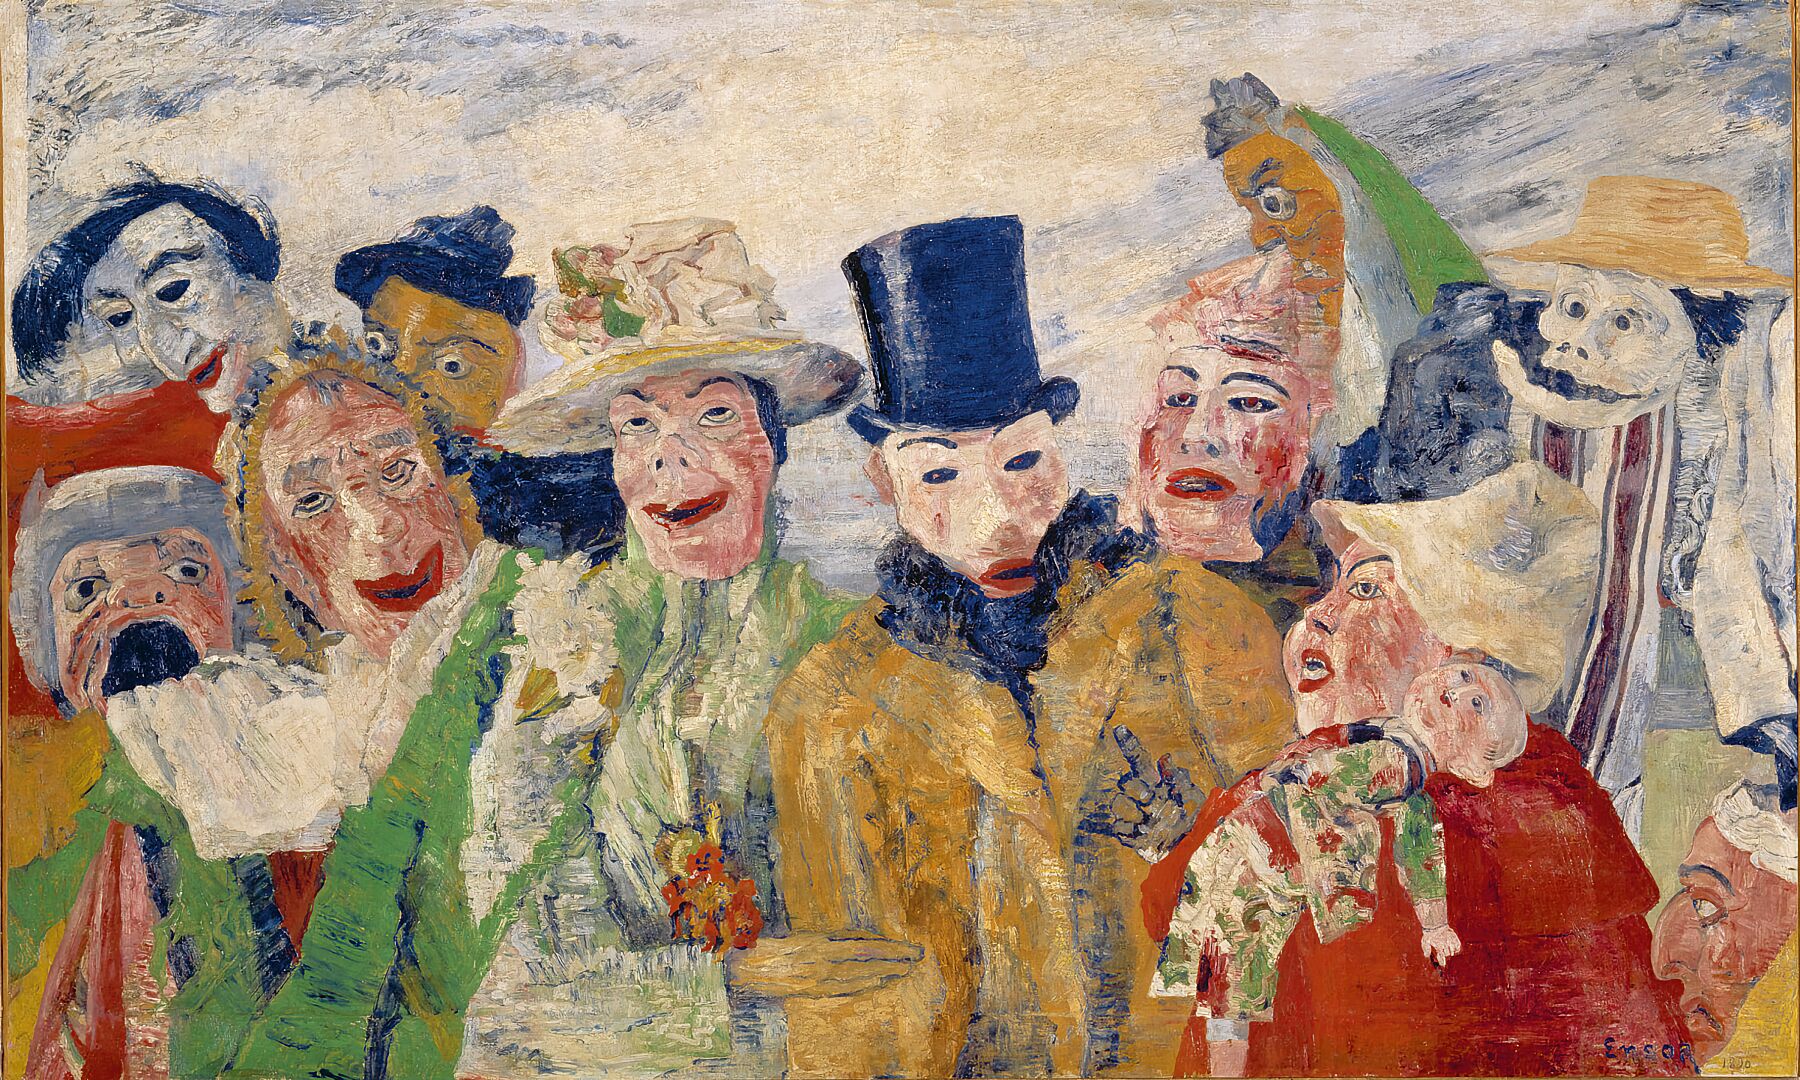 L'Intrigue by James Ensor - 1890